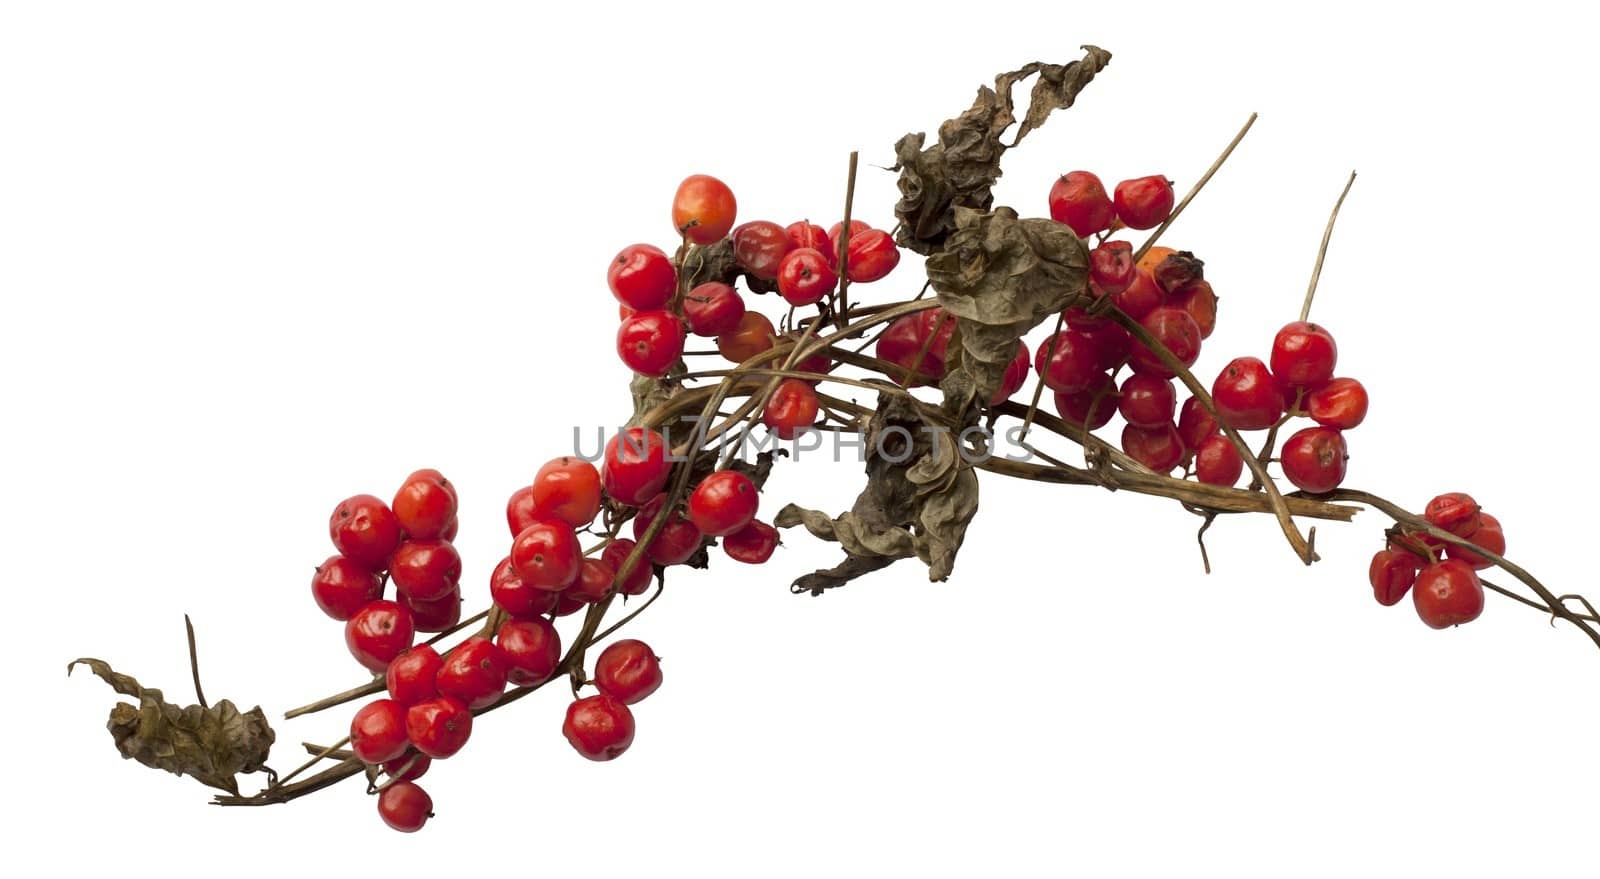 Cut-out Black Bryony berries on white background.